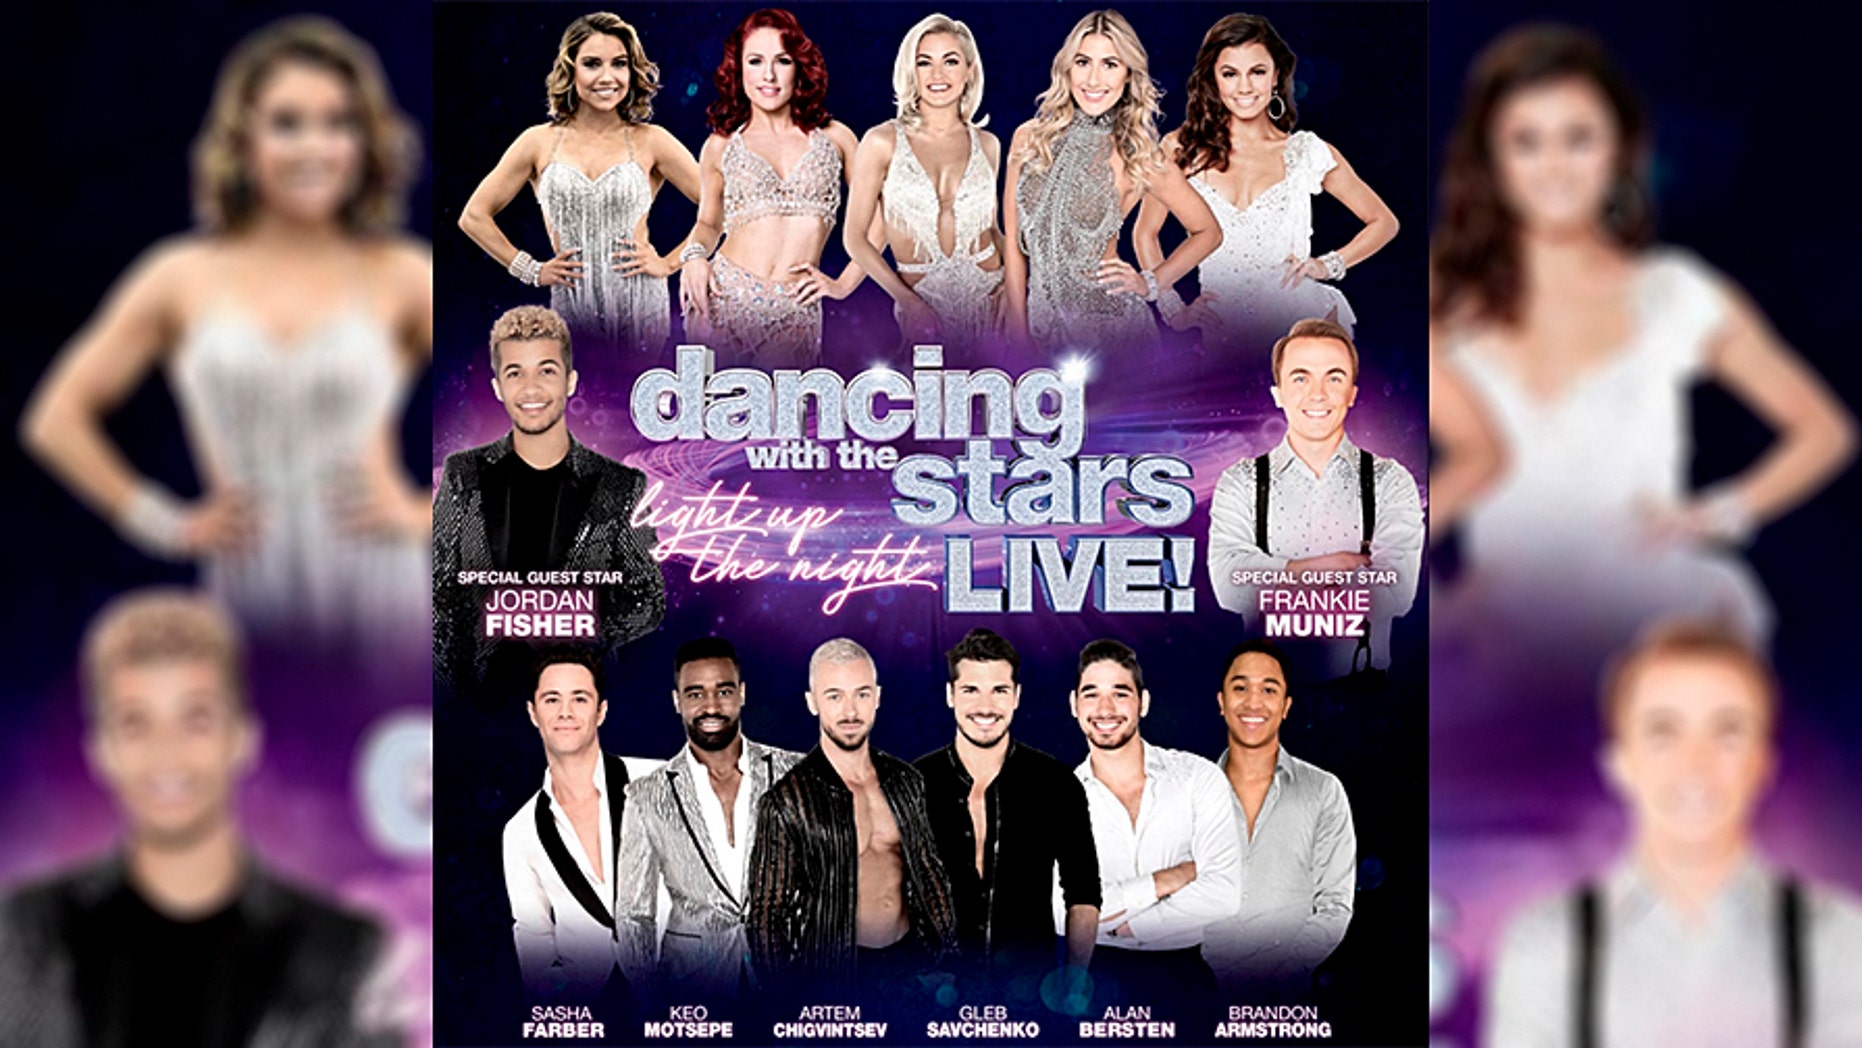 'Dancing with the Stars' tour bus involved in deadly pileup in Iowa